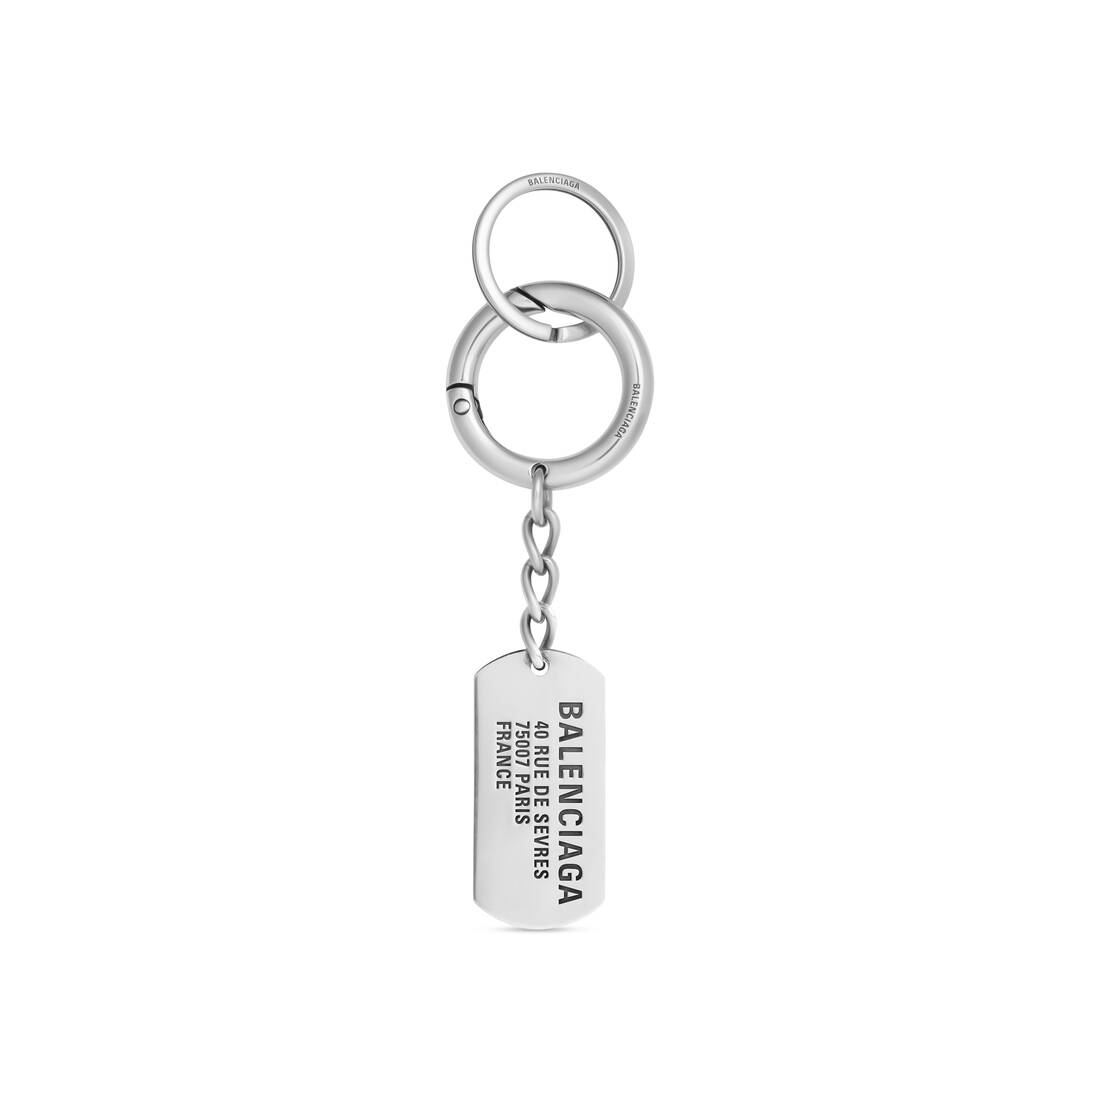 Tags Keychain in Antique Silver